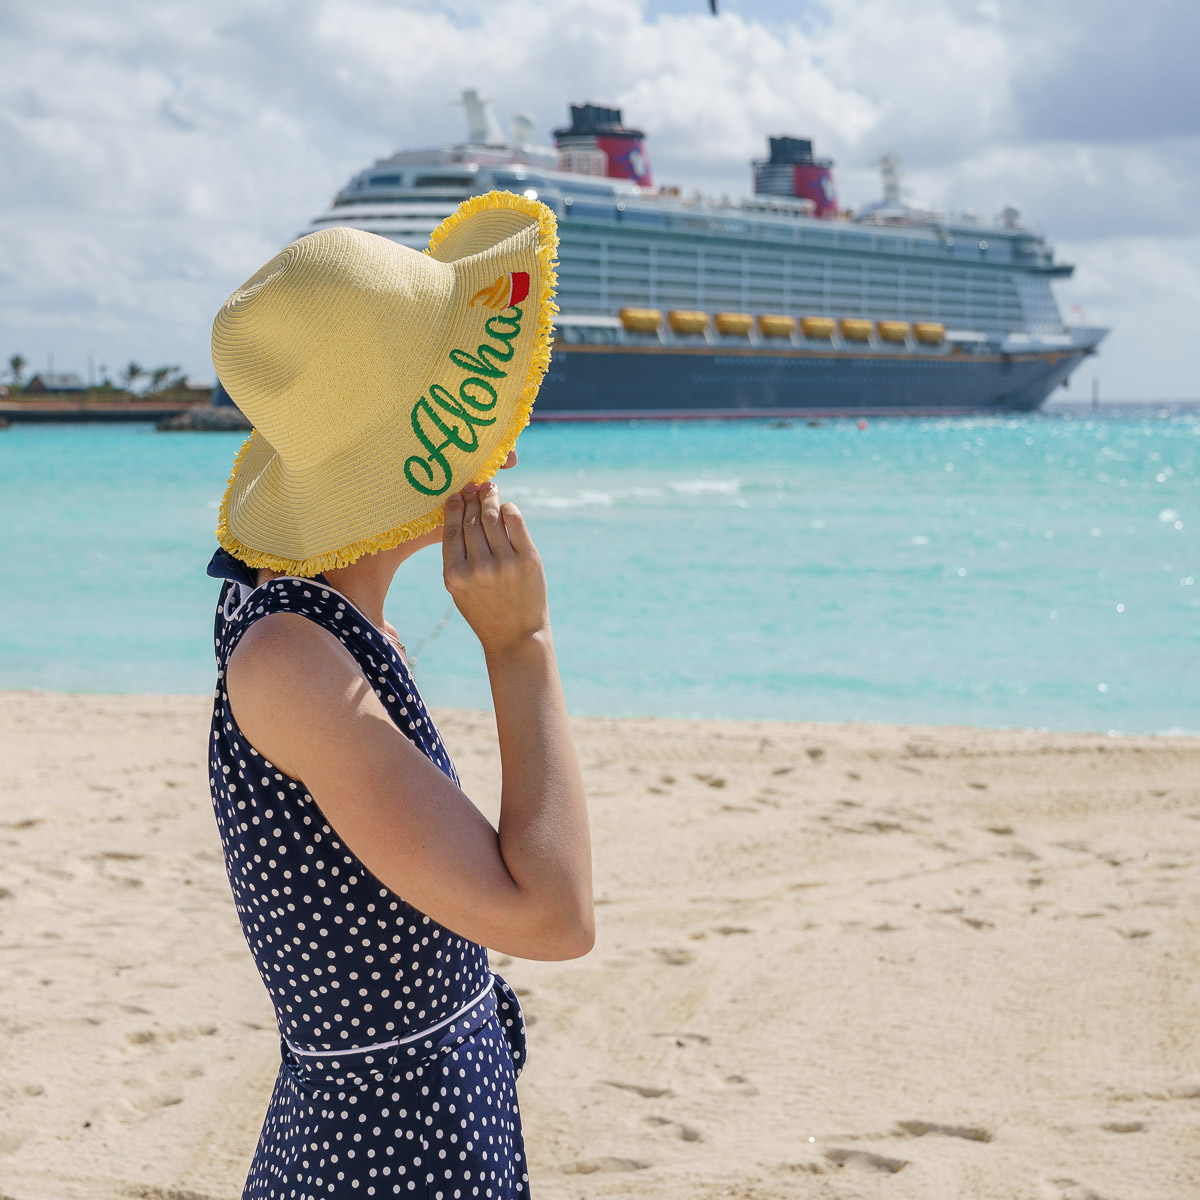 Castaway Cay Activities: a Complete Guide to Beaches and Events featured by top US Disney blogger, Marcie and the Mouse: Remember to bring a sun hat when visiting Castaway Cay on a Disney Cruise